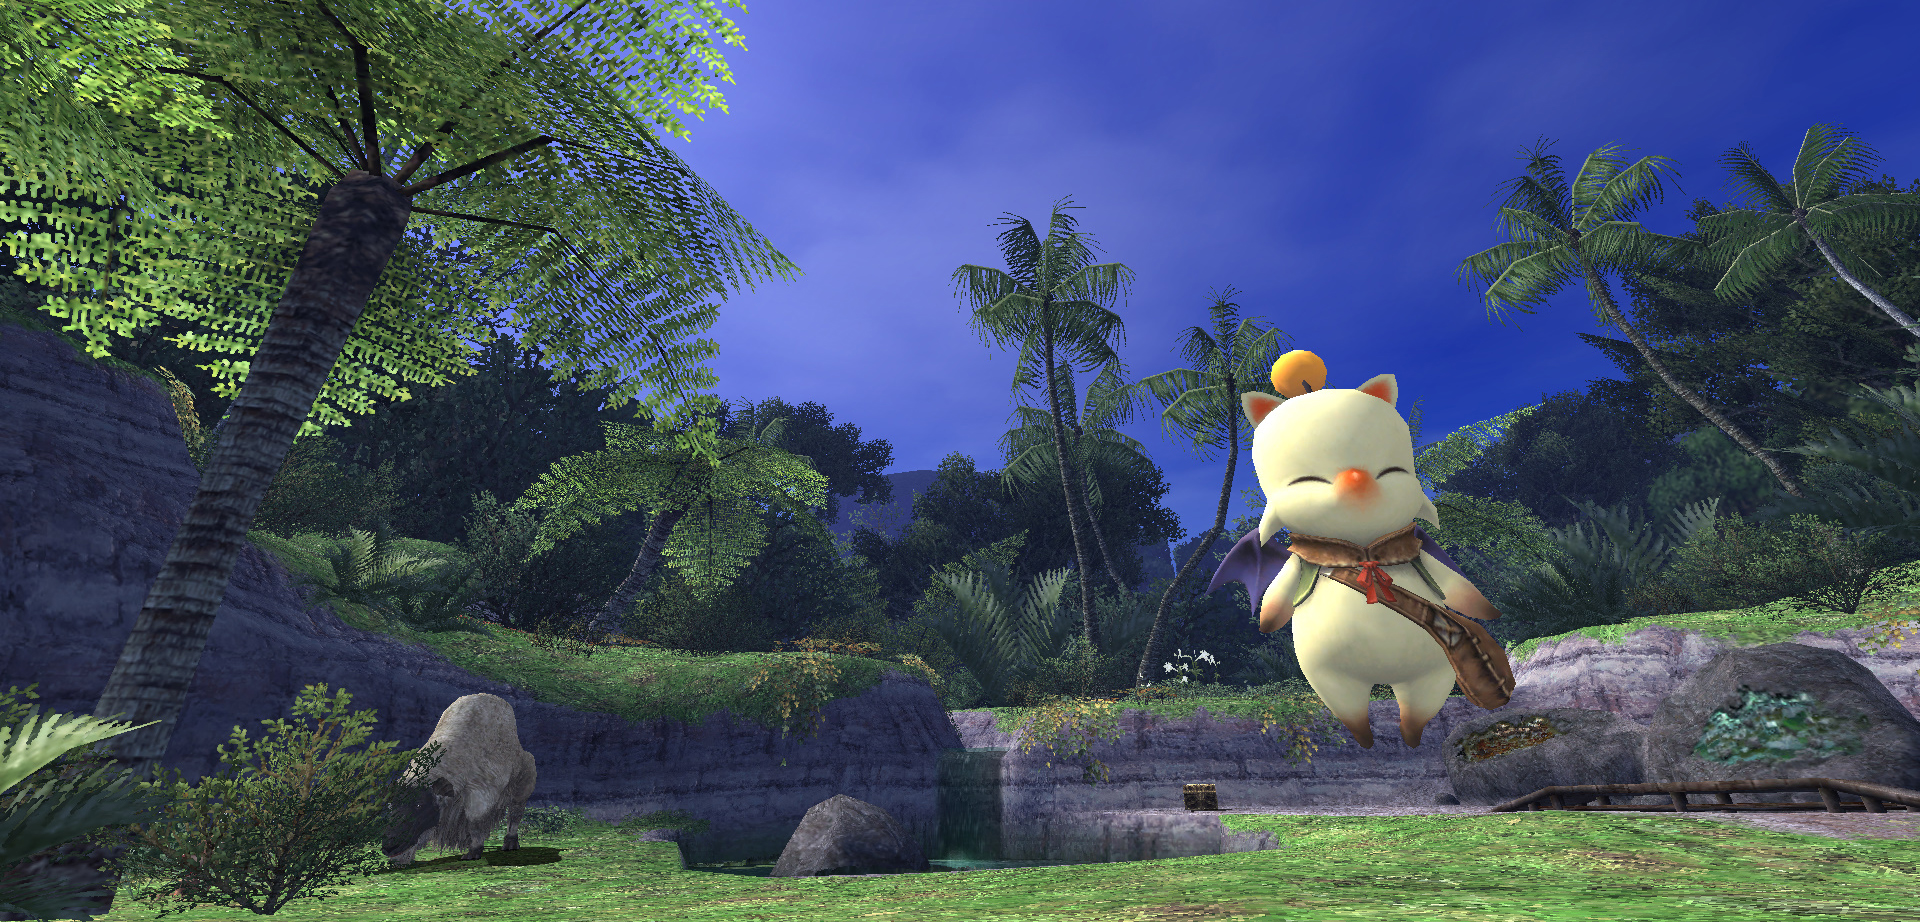 SQUARE ENIX Account Confirmation and How to Return to FINAL FANTASY XI